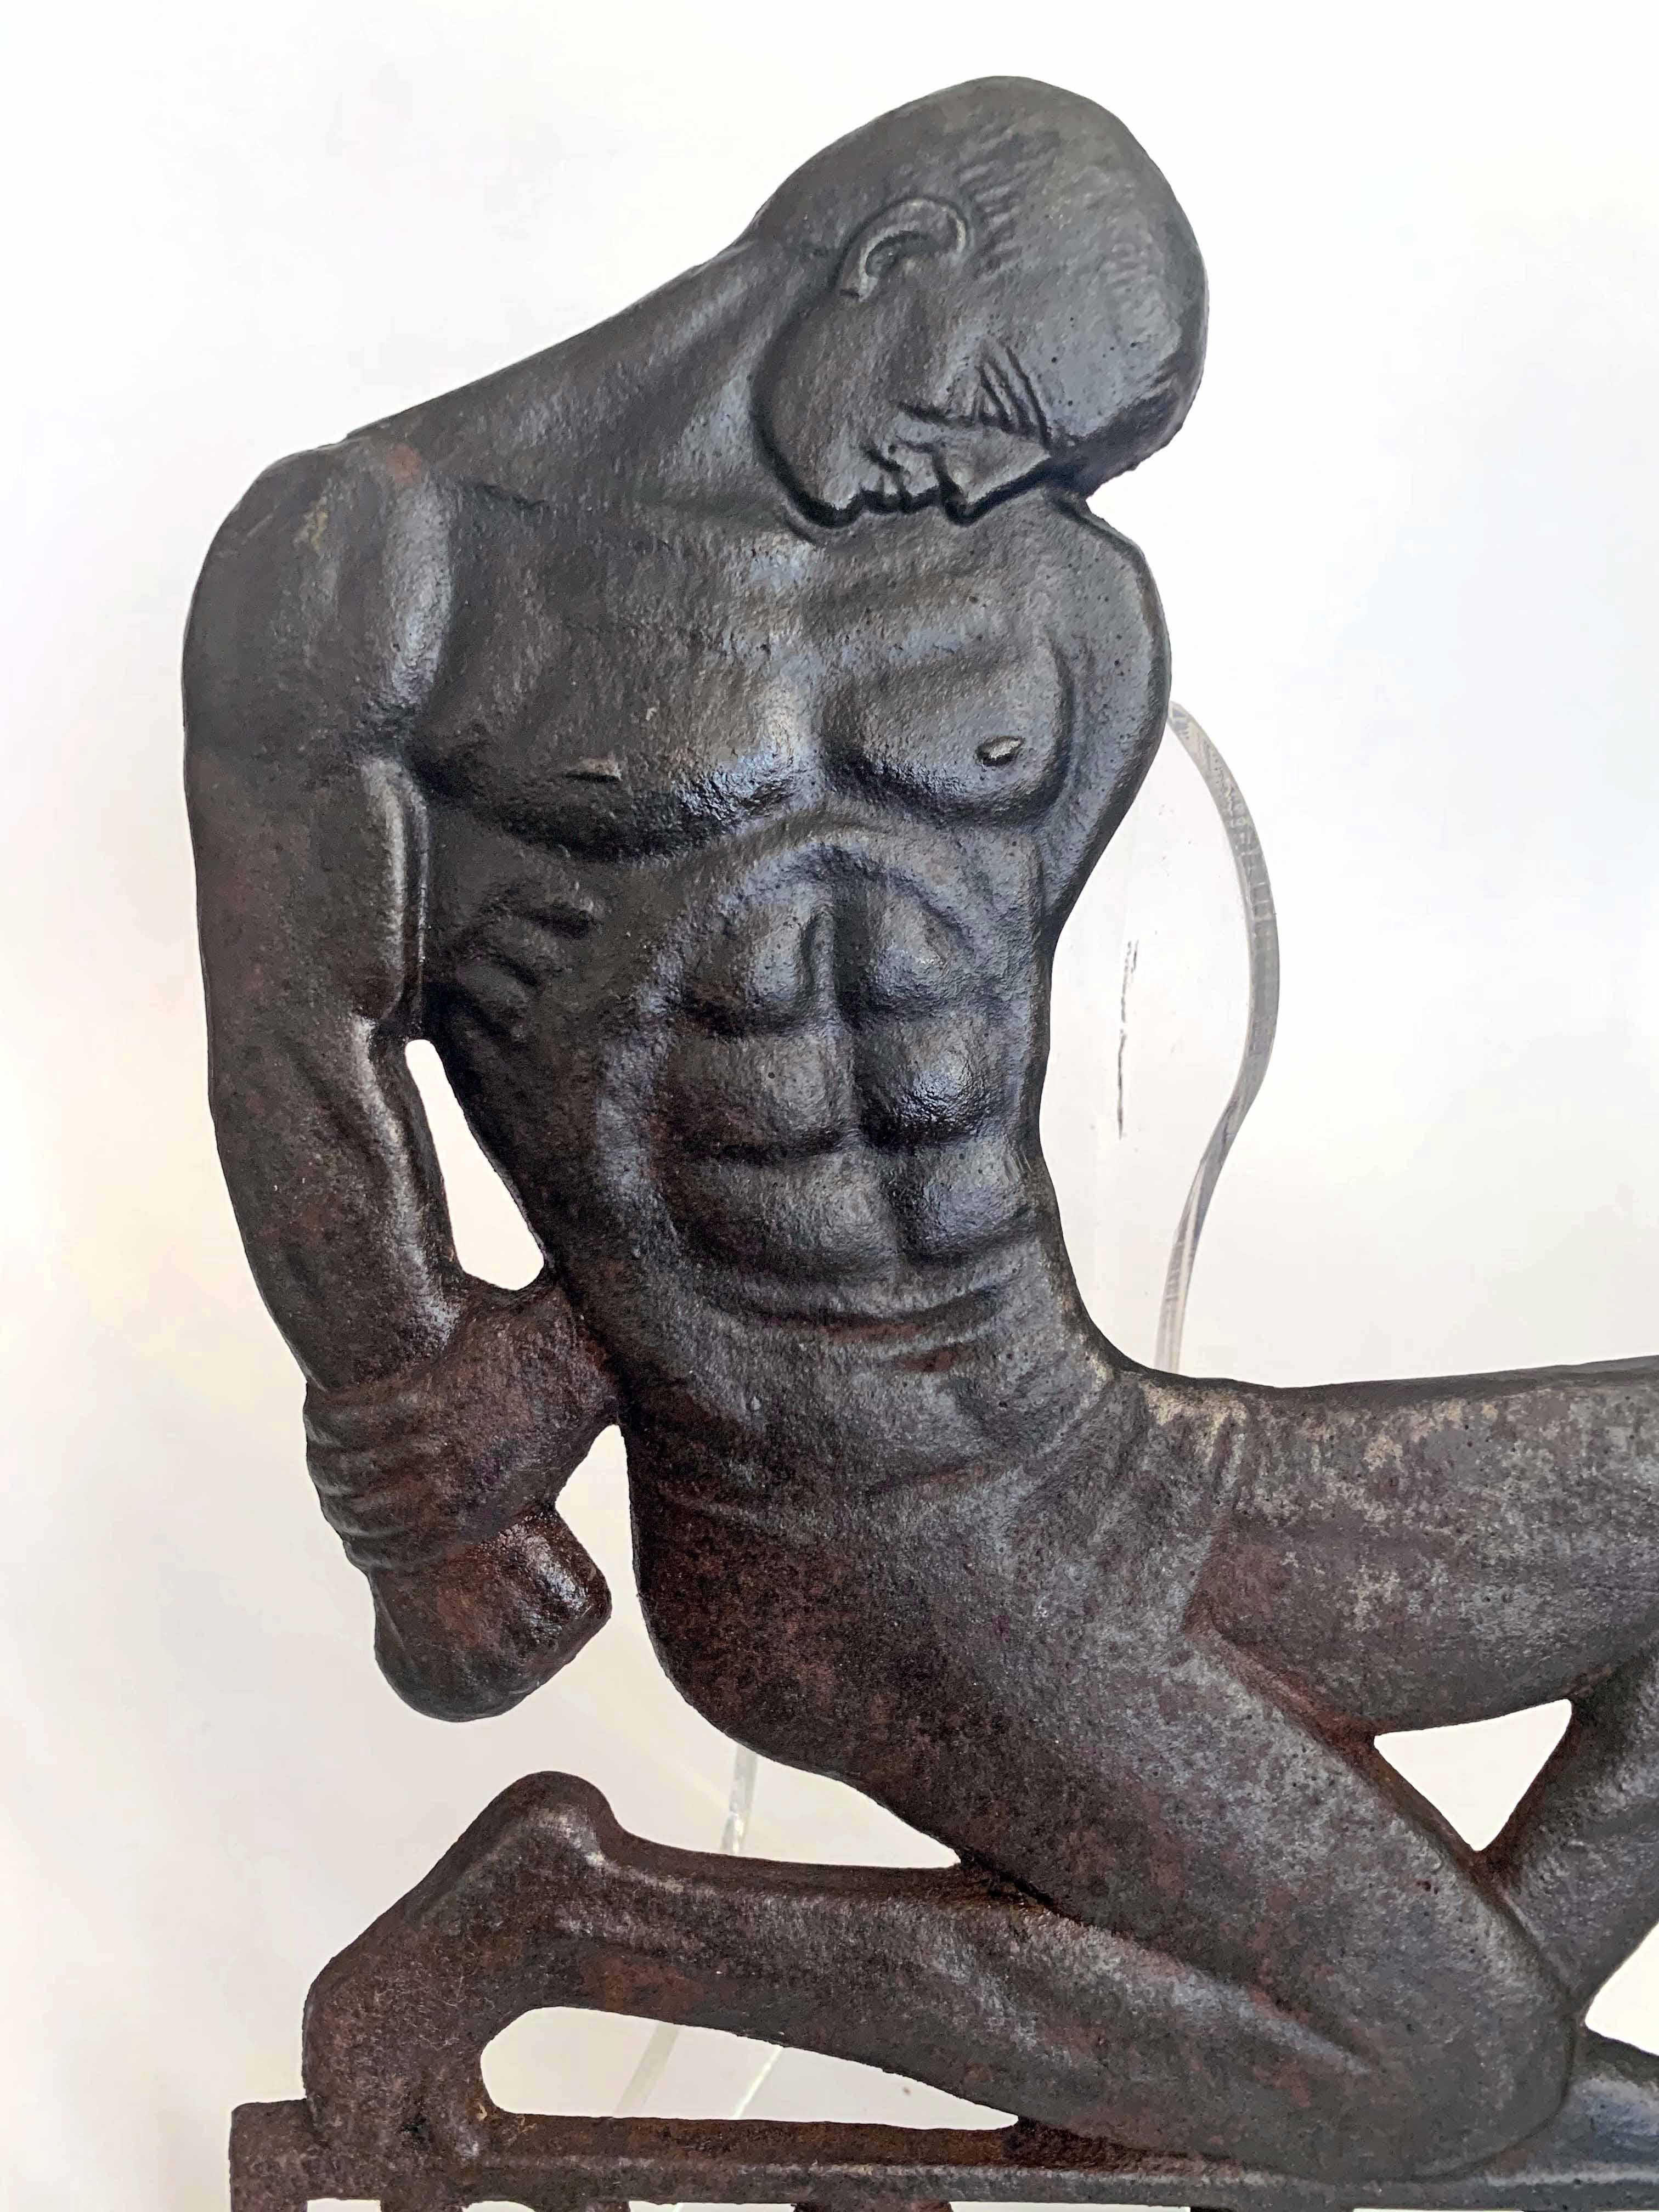 Extraordinarily rare, and perhaps unique, this Art Deco-Moderne sculpture of a kneeling, nude male figure, clearly representing the workers of the coal mining and manufacturing Saar region of Germany -- was cast in iron in 1935. The Saar was